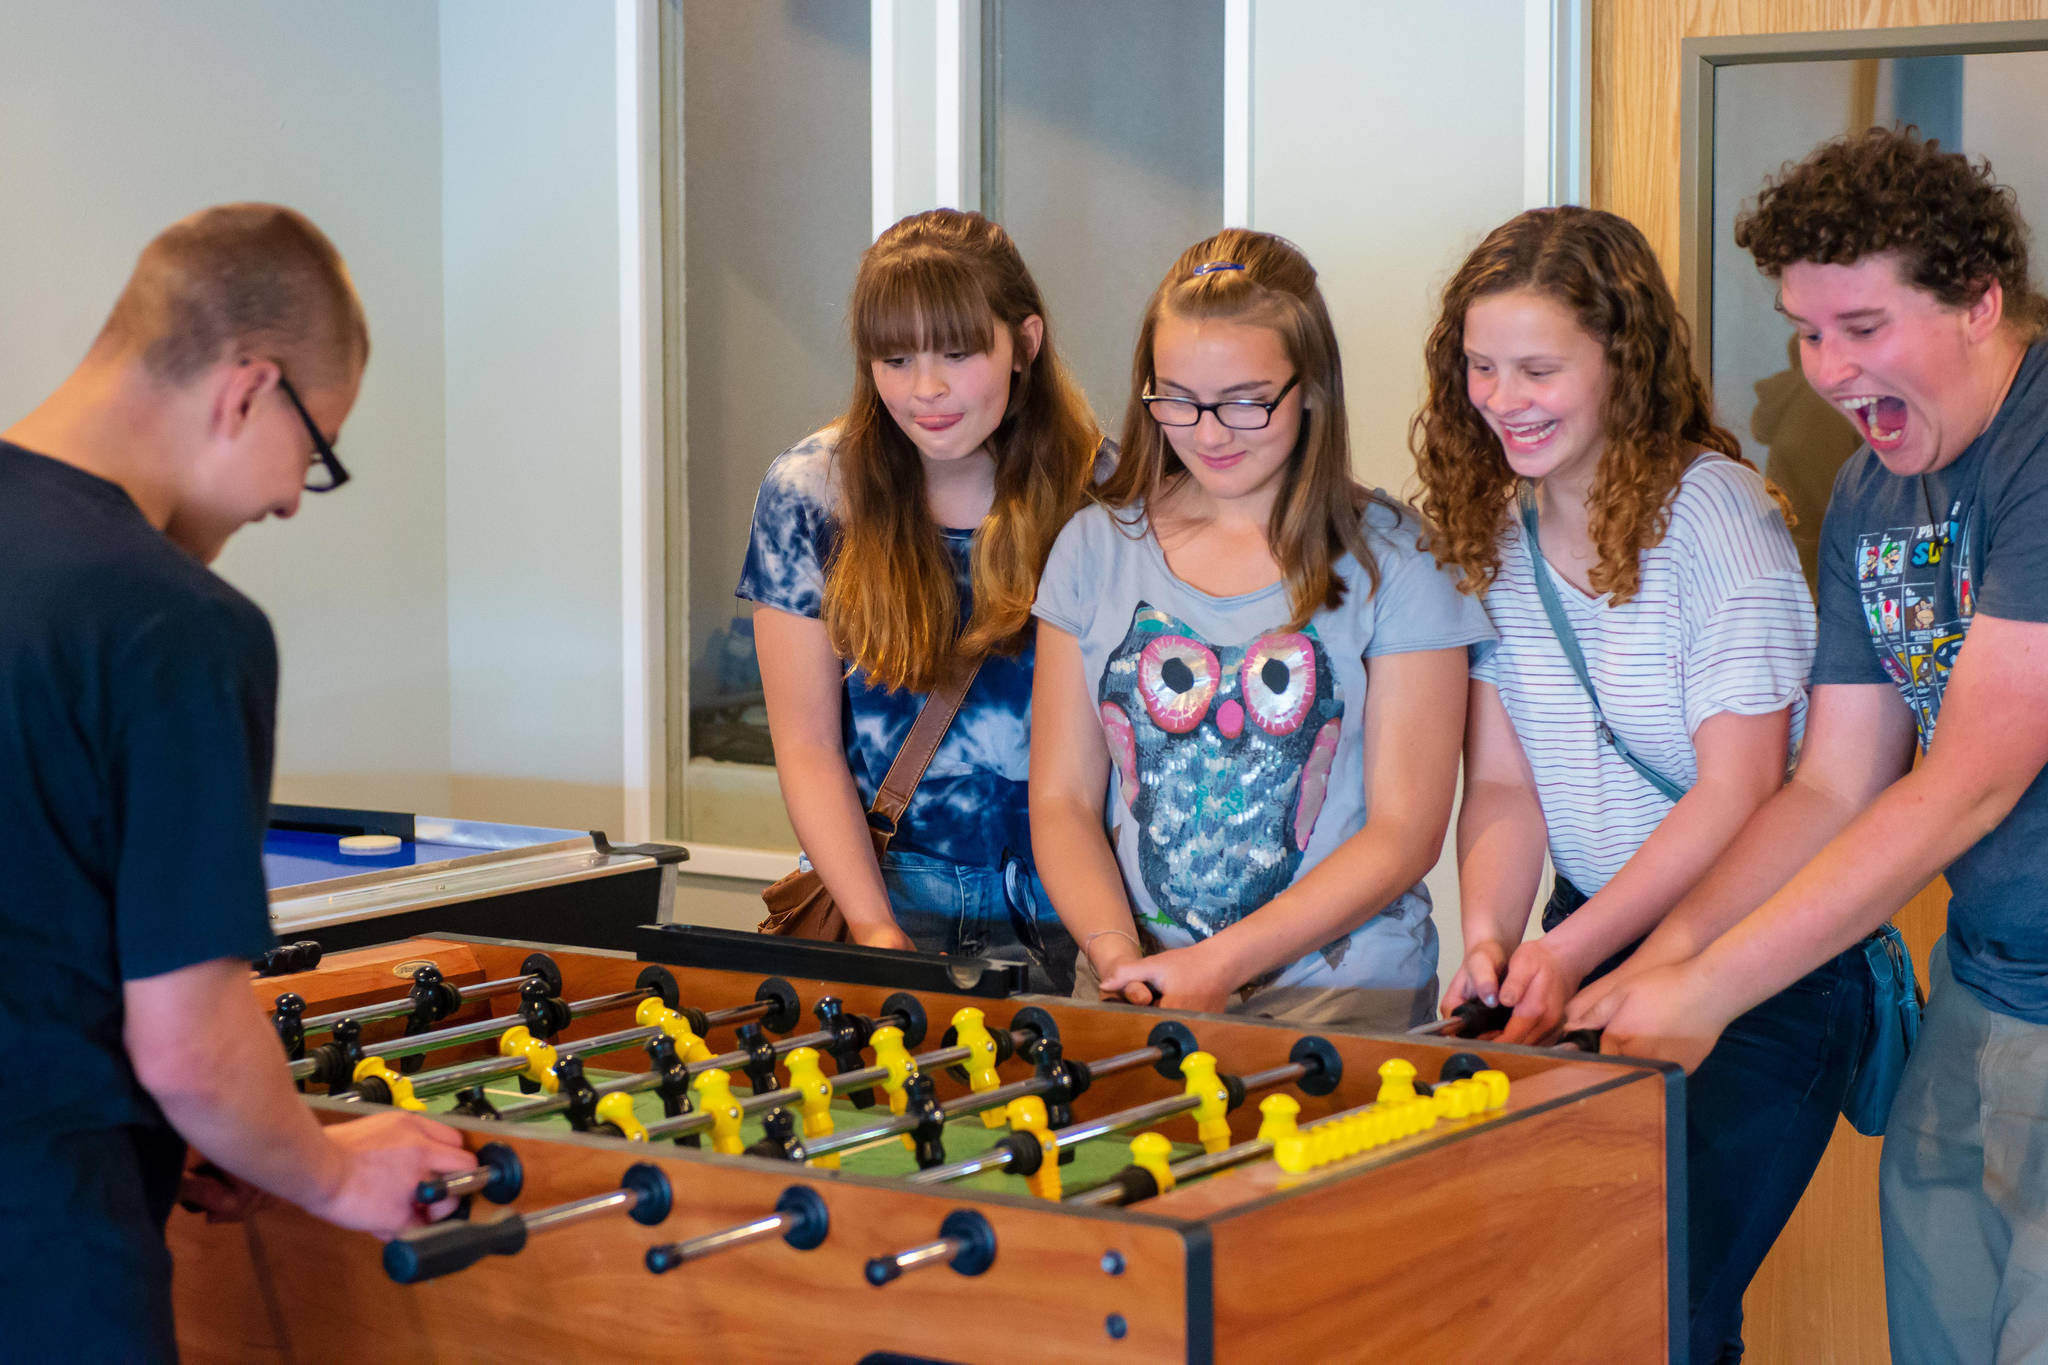 From left, James Lathem, Lacey Lamb, Jenna Carpenter, Lilly Lamb and Hugh Nelson play a round of foosball at the Compass Youth Center in Nikiski, Alaska on Sept. 5, 2018. (Photo courtesy Dan Smouse)